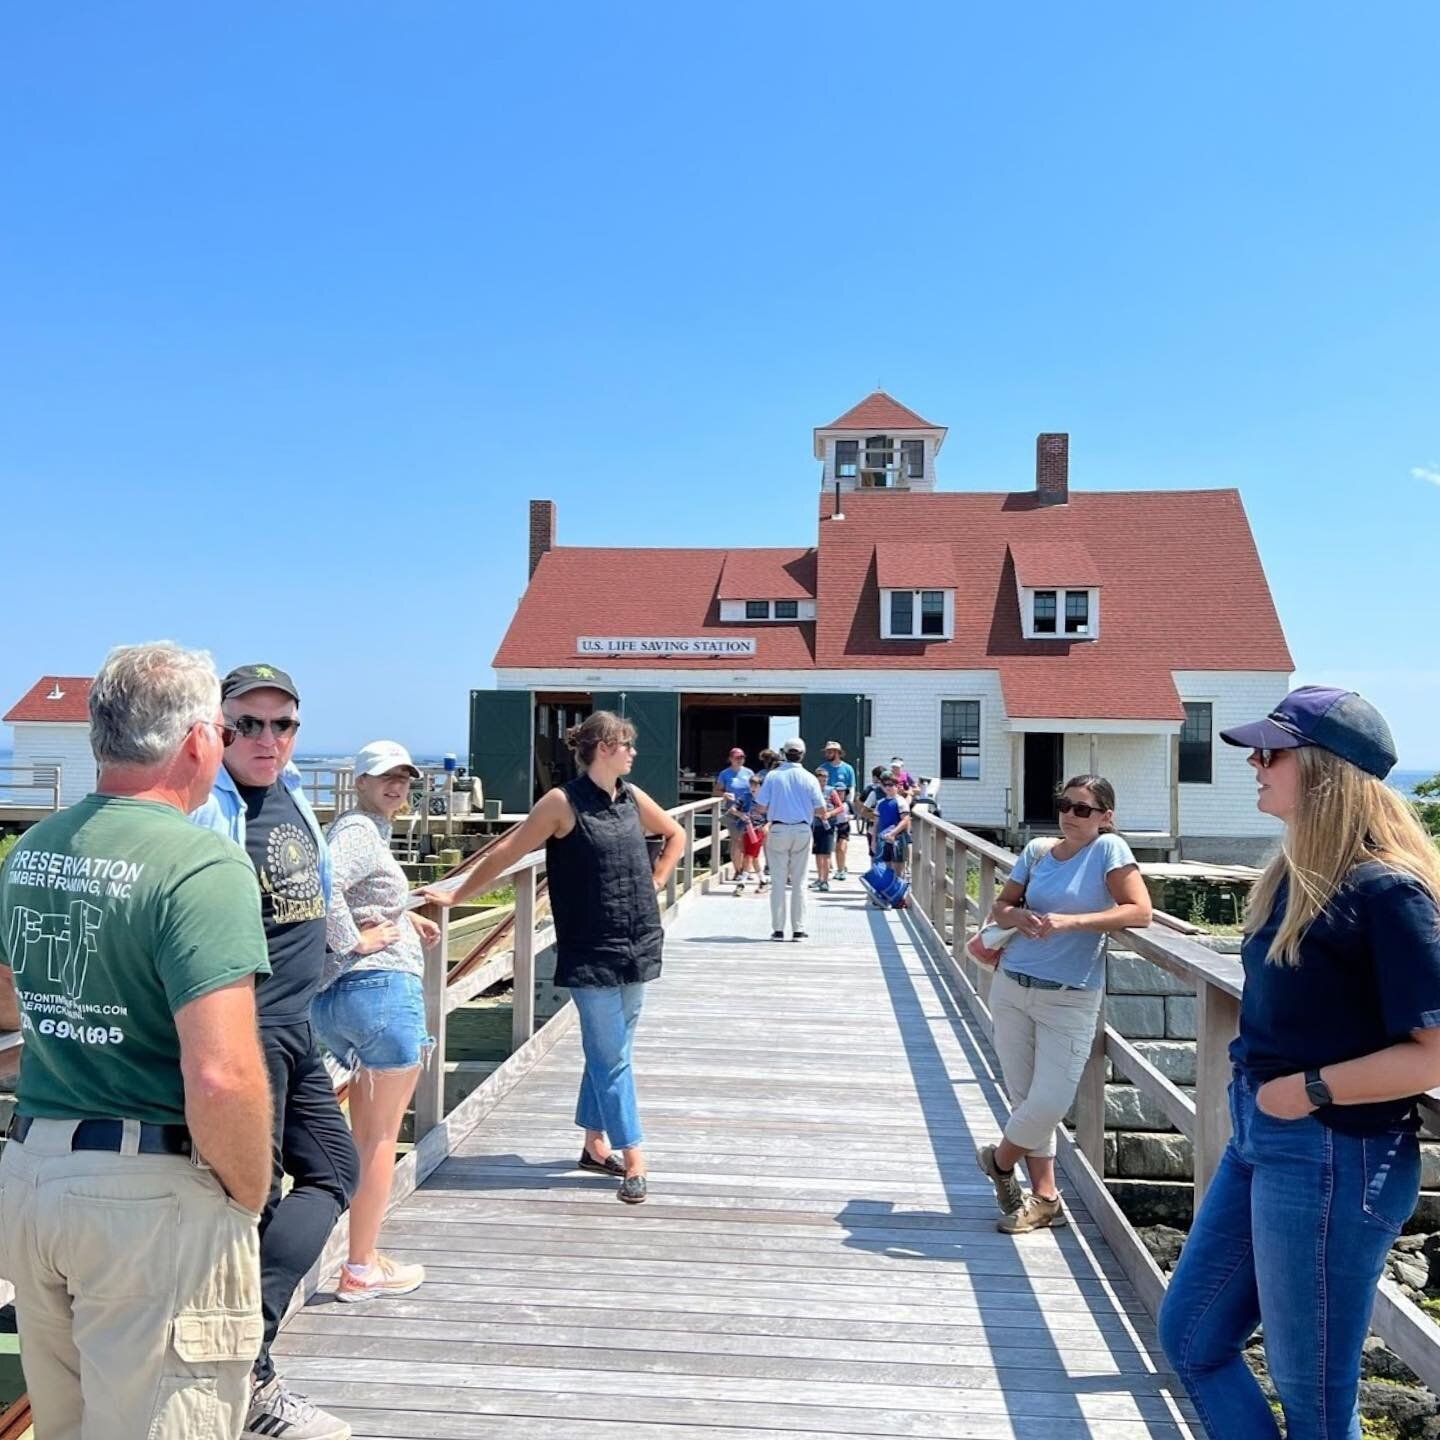 Become of Member of Maine Preservation! ⁠
⁠
*What We Do:* Maine Preservation provides technical assistance and financial support for groundbreaking projects across the state. We advocate for policies that promote historic resources and educate the pu